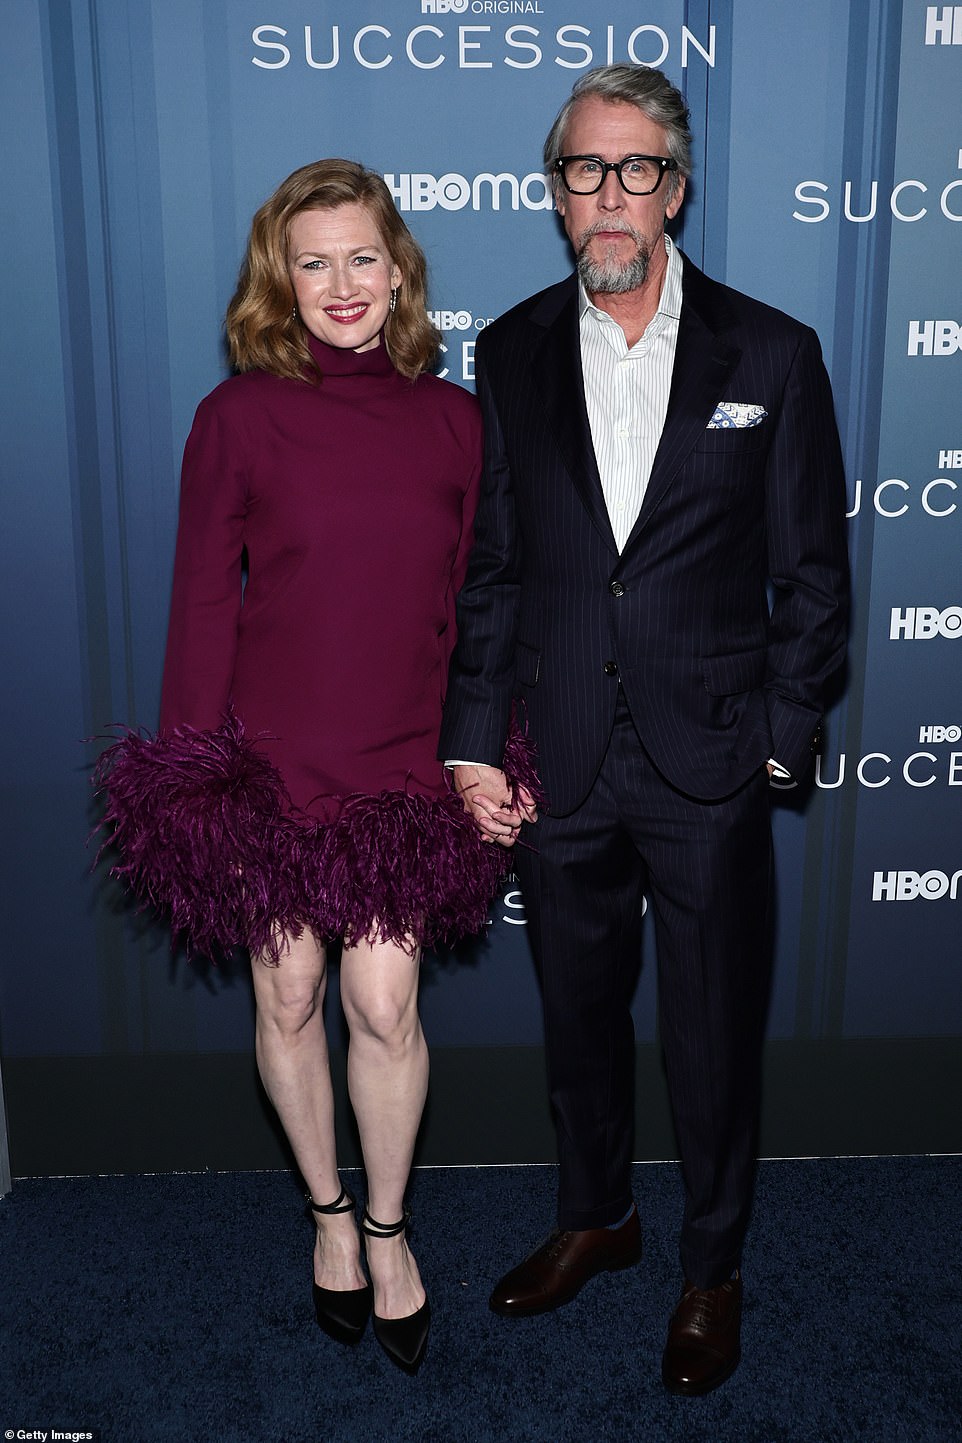 Date night: Ruck held hands with his wife Mireille Enos